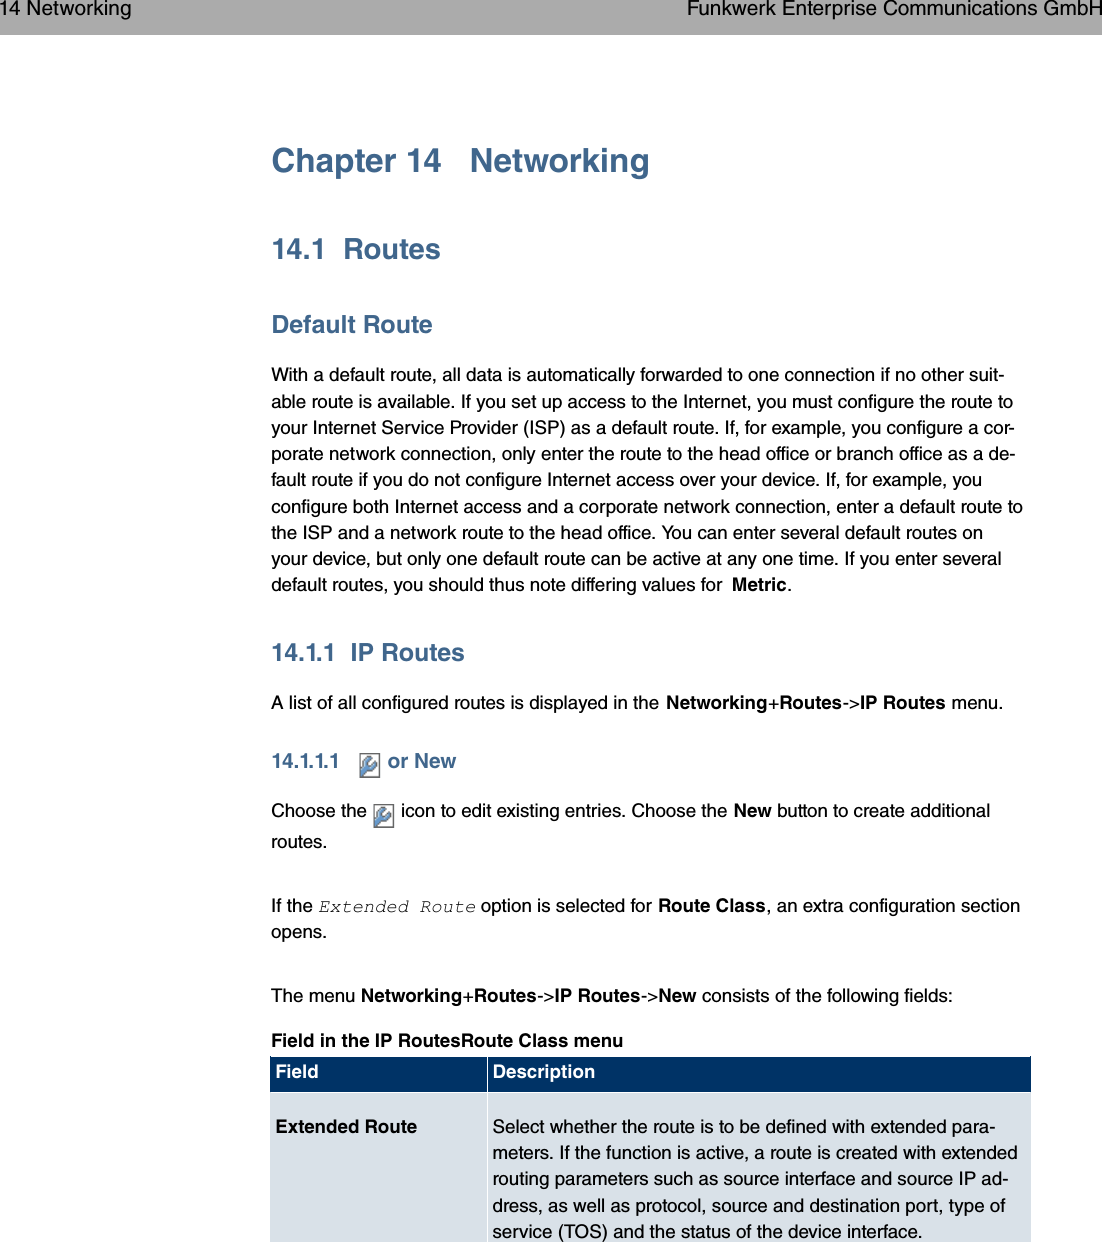 Chapter 14 Networking14.1 RoutesDefault RouteWith a default route, all data is automatically forwarded to one connection if no other suit-able route is available. If you set up access to the Internet, you must configure the route toyour Internet Service Provider (ISP) as a default route. If, for example, you configure a cor-porate network connection, only enter the route to the head office or branch office as a de-fault route if you do not configure Internet access over your device. If, for example, youconfigure both Internet access and a corporate network connection, enter a default route tothe ISP and a network route to the head office. You can enter several default routes onyour device, but only one default route can be active at any one time. If you enter severaldefault routes, you should thus note differing values for Metric.14.1.1 IP RoutesA list of all configured routes is displayed in the Networking+Routes-&gt;IP Routes menu.14.1.1.1 or NewChoose the icon to edit existing entries. Choose the New button to create additionalroutes.If the *:&quot; 7&quot; option is selected for Route Class, an extra configuration sectionopens.The menu Networking+Routes-&gt;IP Routes-&gt;New consists of the following fields:Field in the IP RoutesRoute Class menuField DescriptionExtended Route Select whether the route is to be defined with extended para-meters. If the function is active, a route is created with extendedrouting parameters such as source interface and source IP ad-dress, as well as protocol, source and destination port, type ofservice (TOS) and the status of the device interface.14 Networking Funkwerk Enterprise Communications GmbH166 bintec WLAN and Industrial WLAN